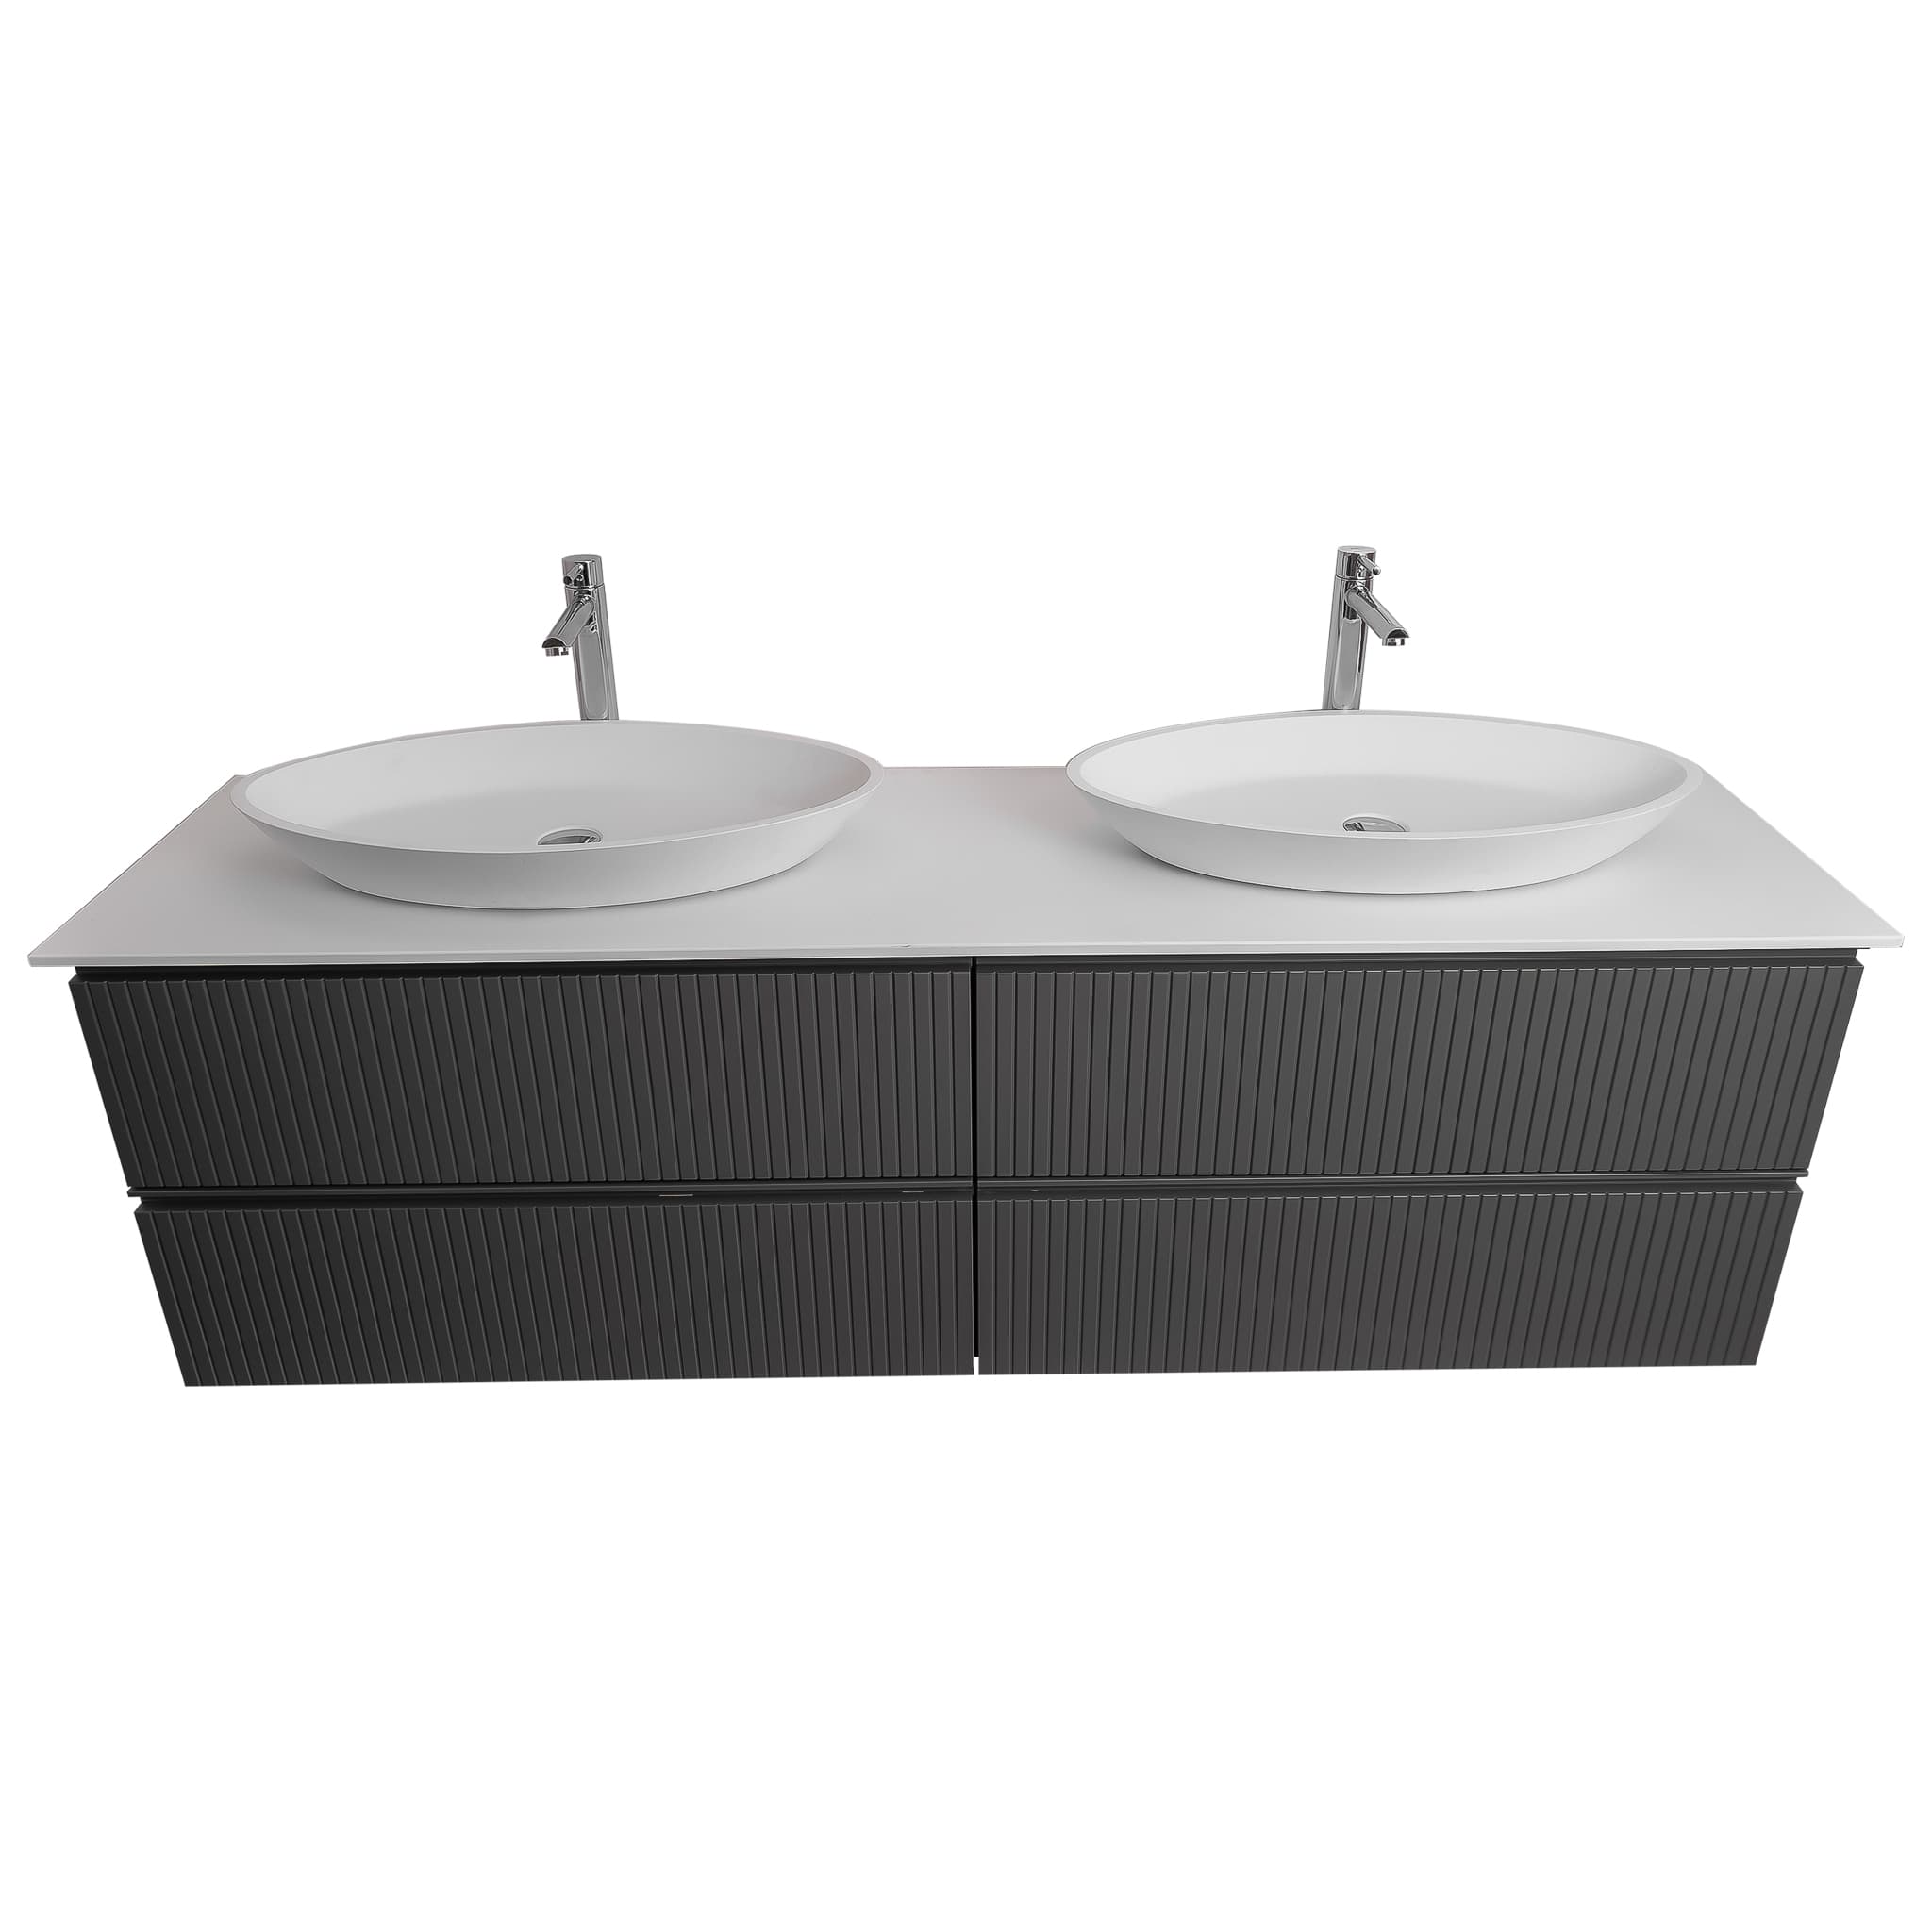 Ares 63 Matte Grey Cabinet, Solid Surface Flat White Counter And Two Oval Solid Surface White Basin 1305, Wall Mounted Modern Vanity Set